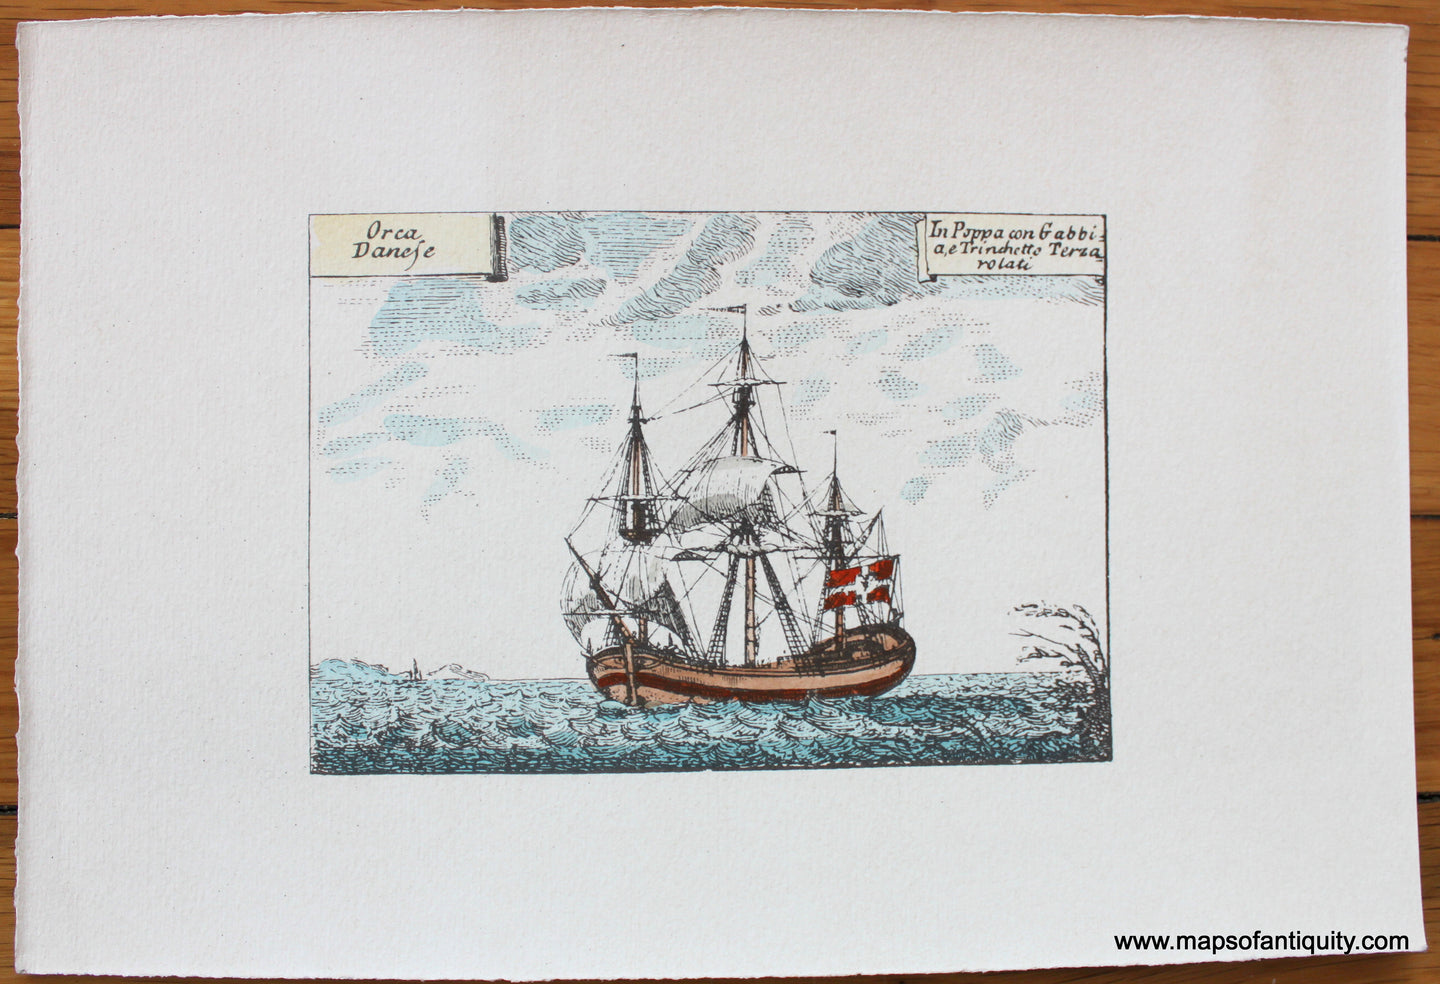 Digitally-Engraved-Specialty-Reproduction-Reproductions-Print-Prints-Illustration-Illustrations-Ships-Ship-Maritime-Nautical-Maps-of-Antiquity